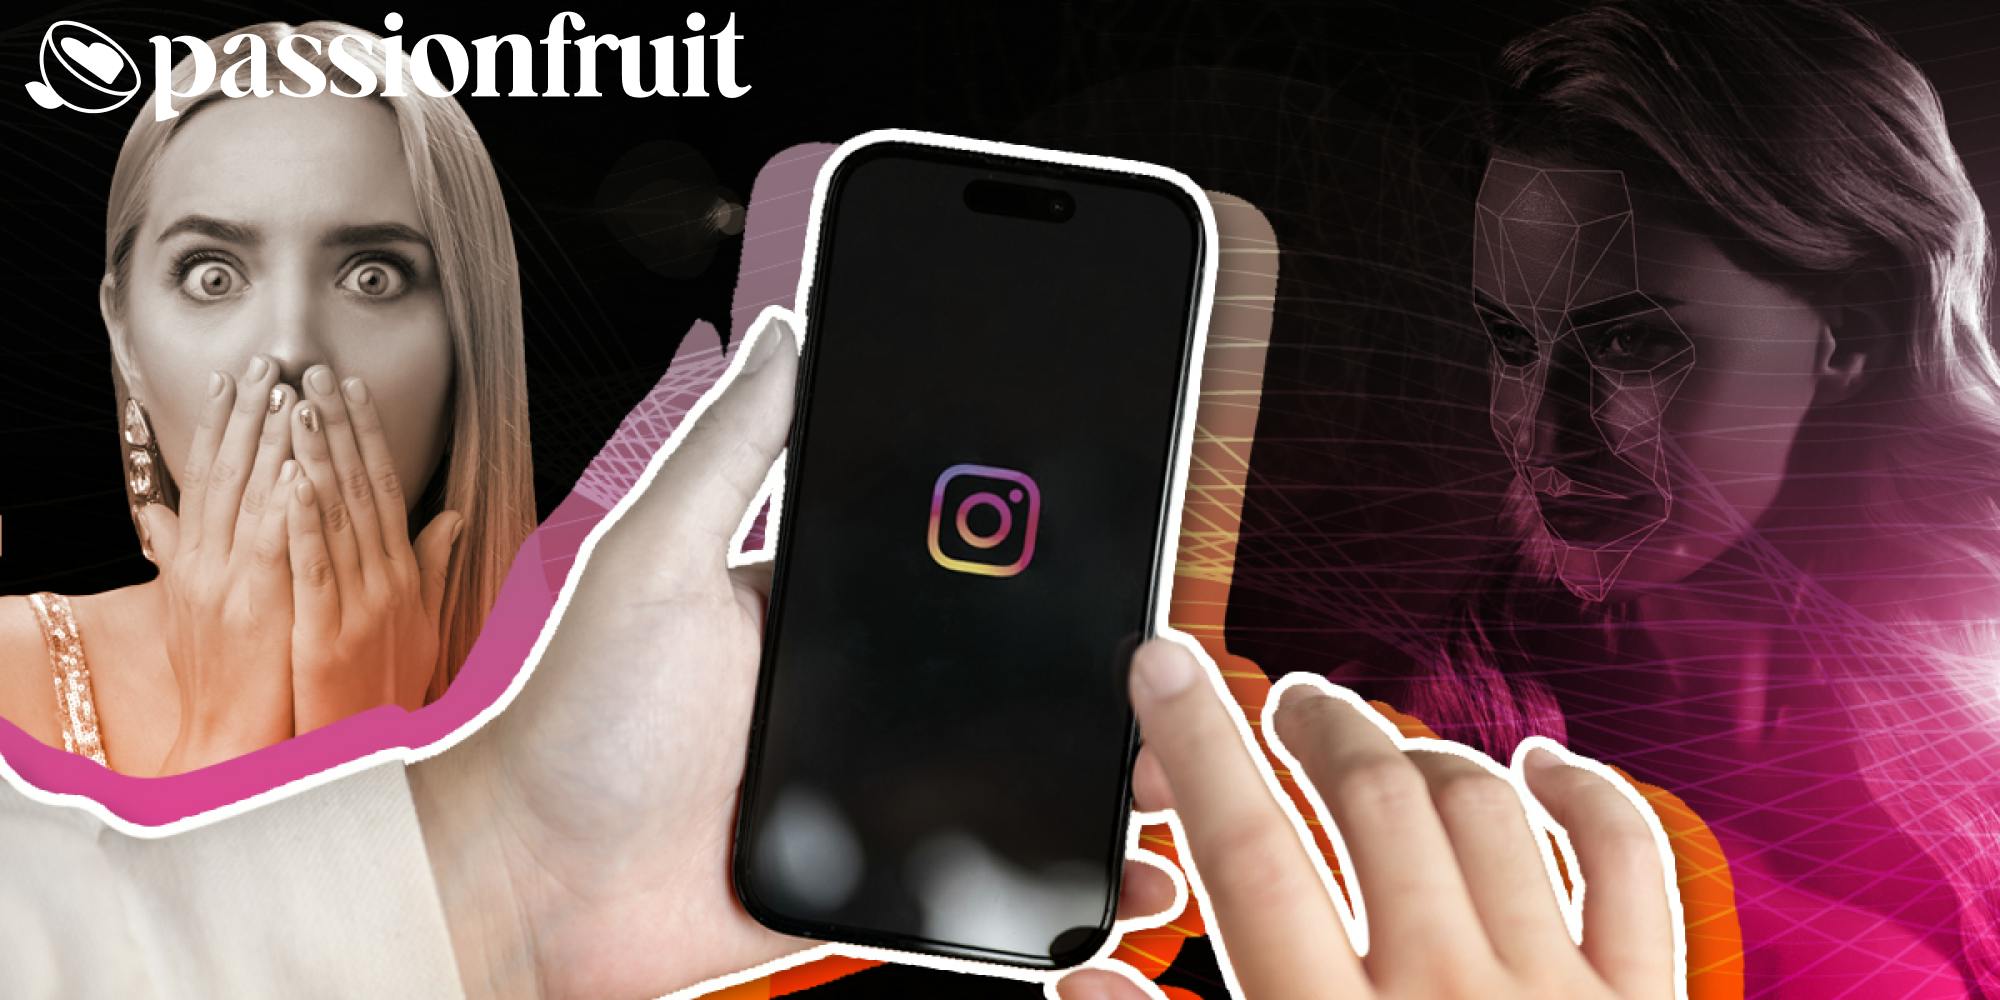 a woman with a shocked expression next to an iphone and depiction of ai influencer with hand holding phone with instagram logo and a logo for passionfruit